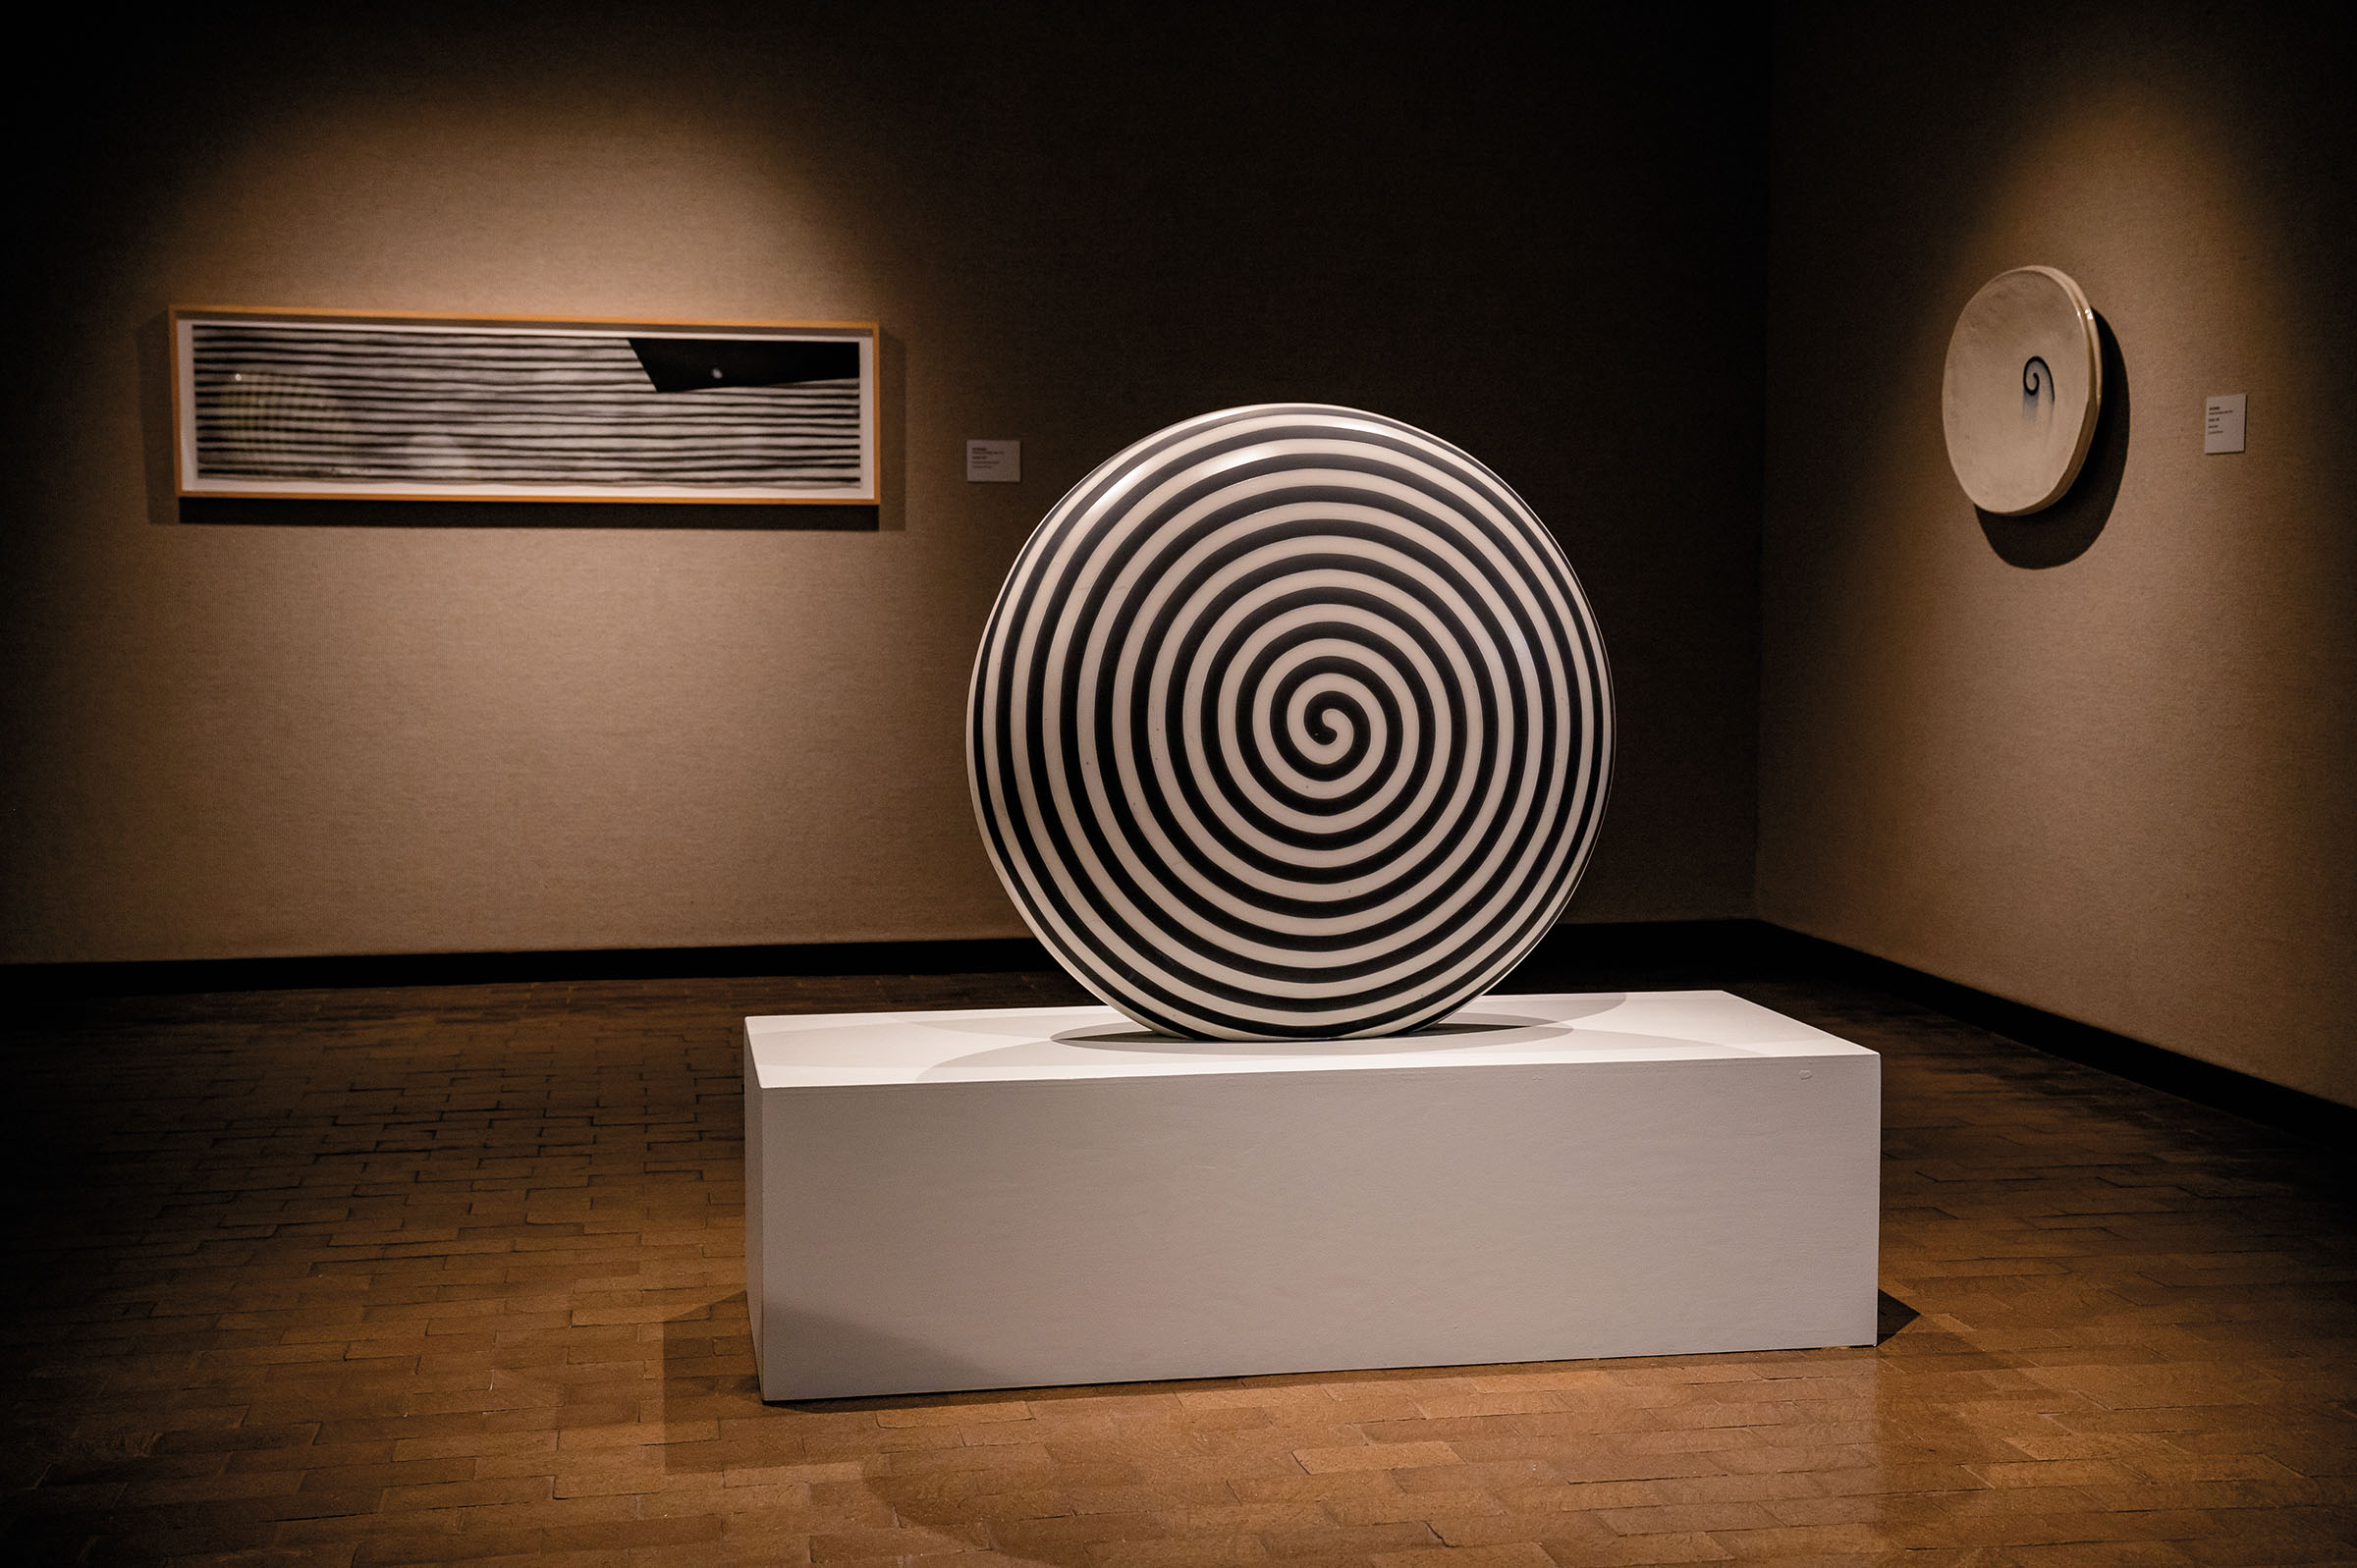 A large circular sculpture painted in a black and white spiral